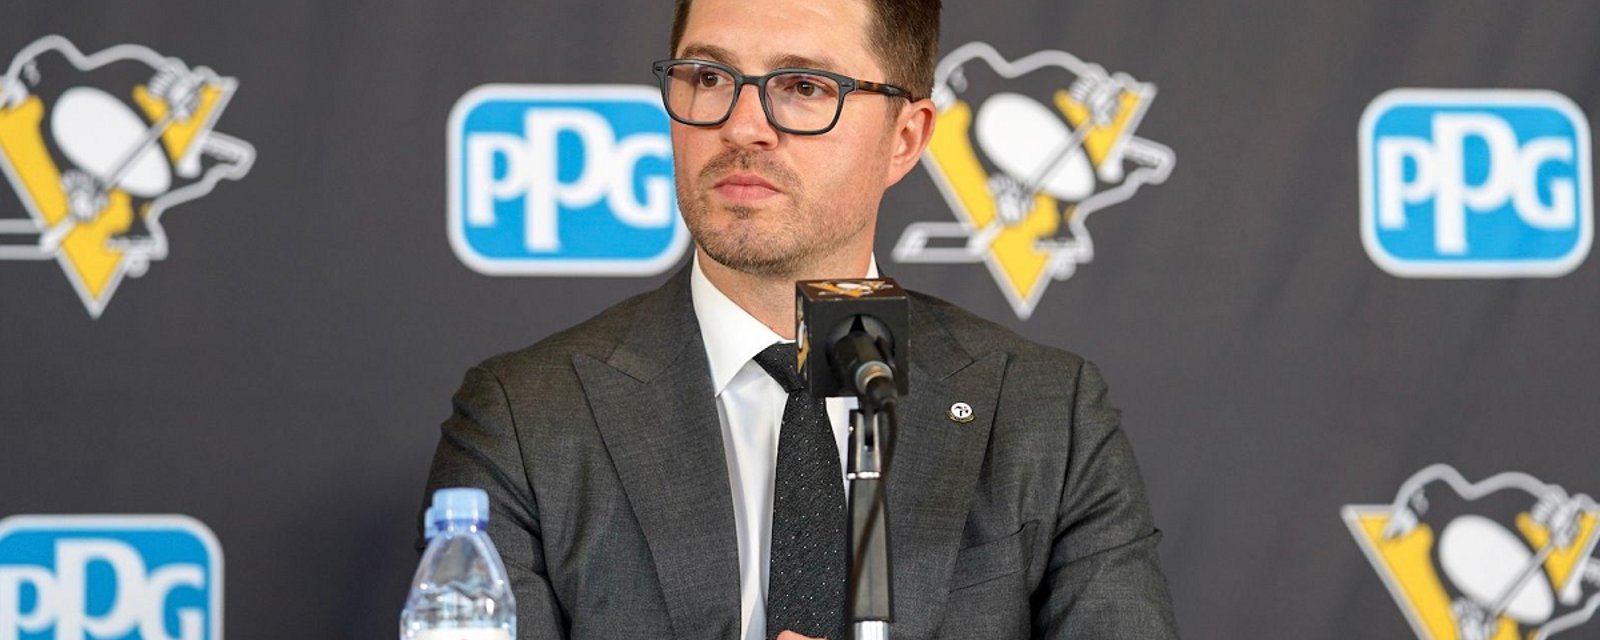 Dubas' first trade for the Penguins could be monstrous.